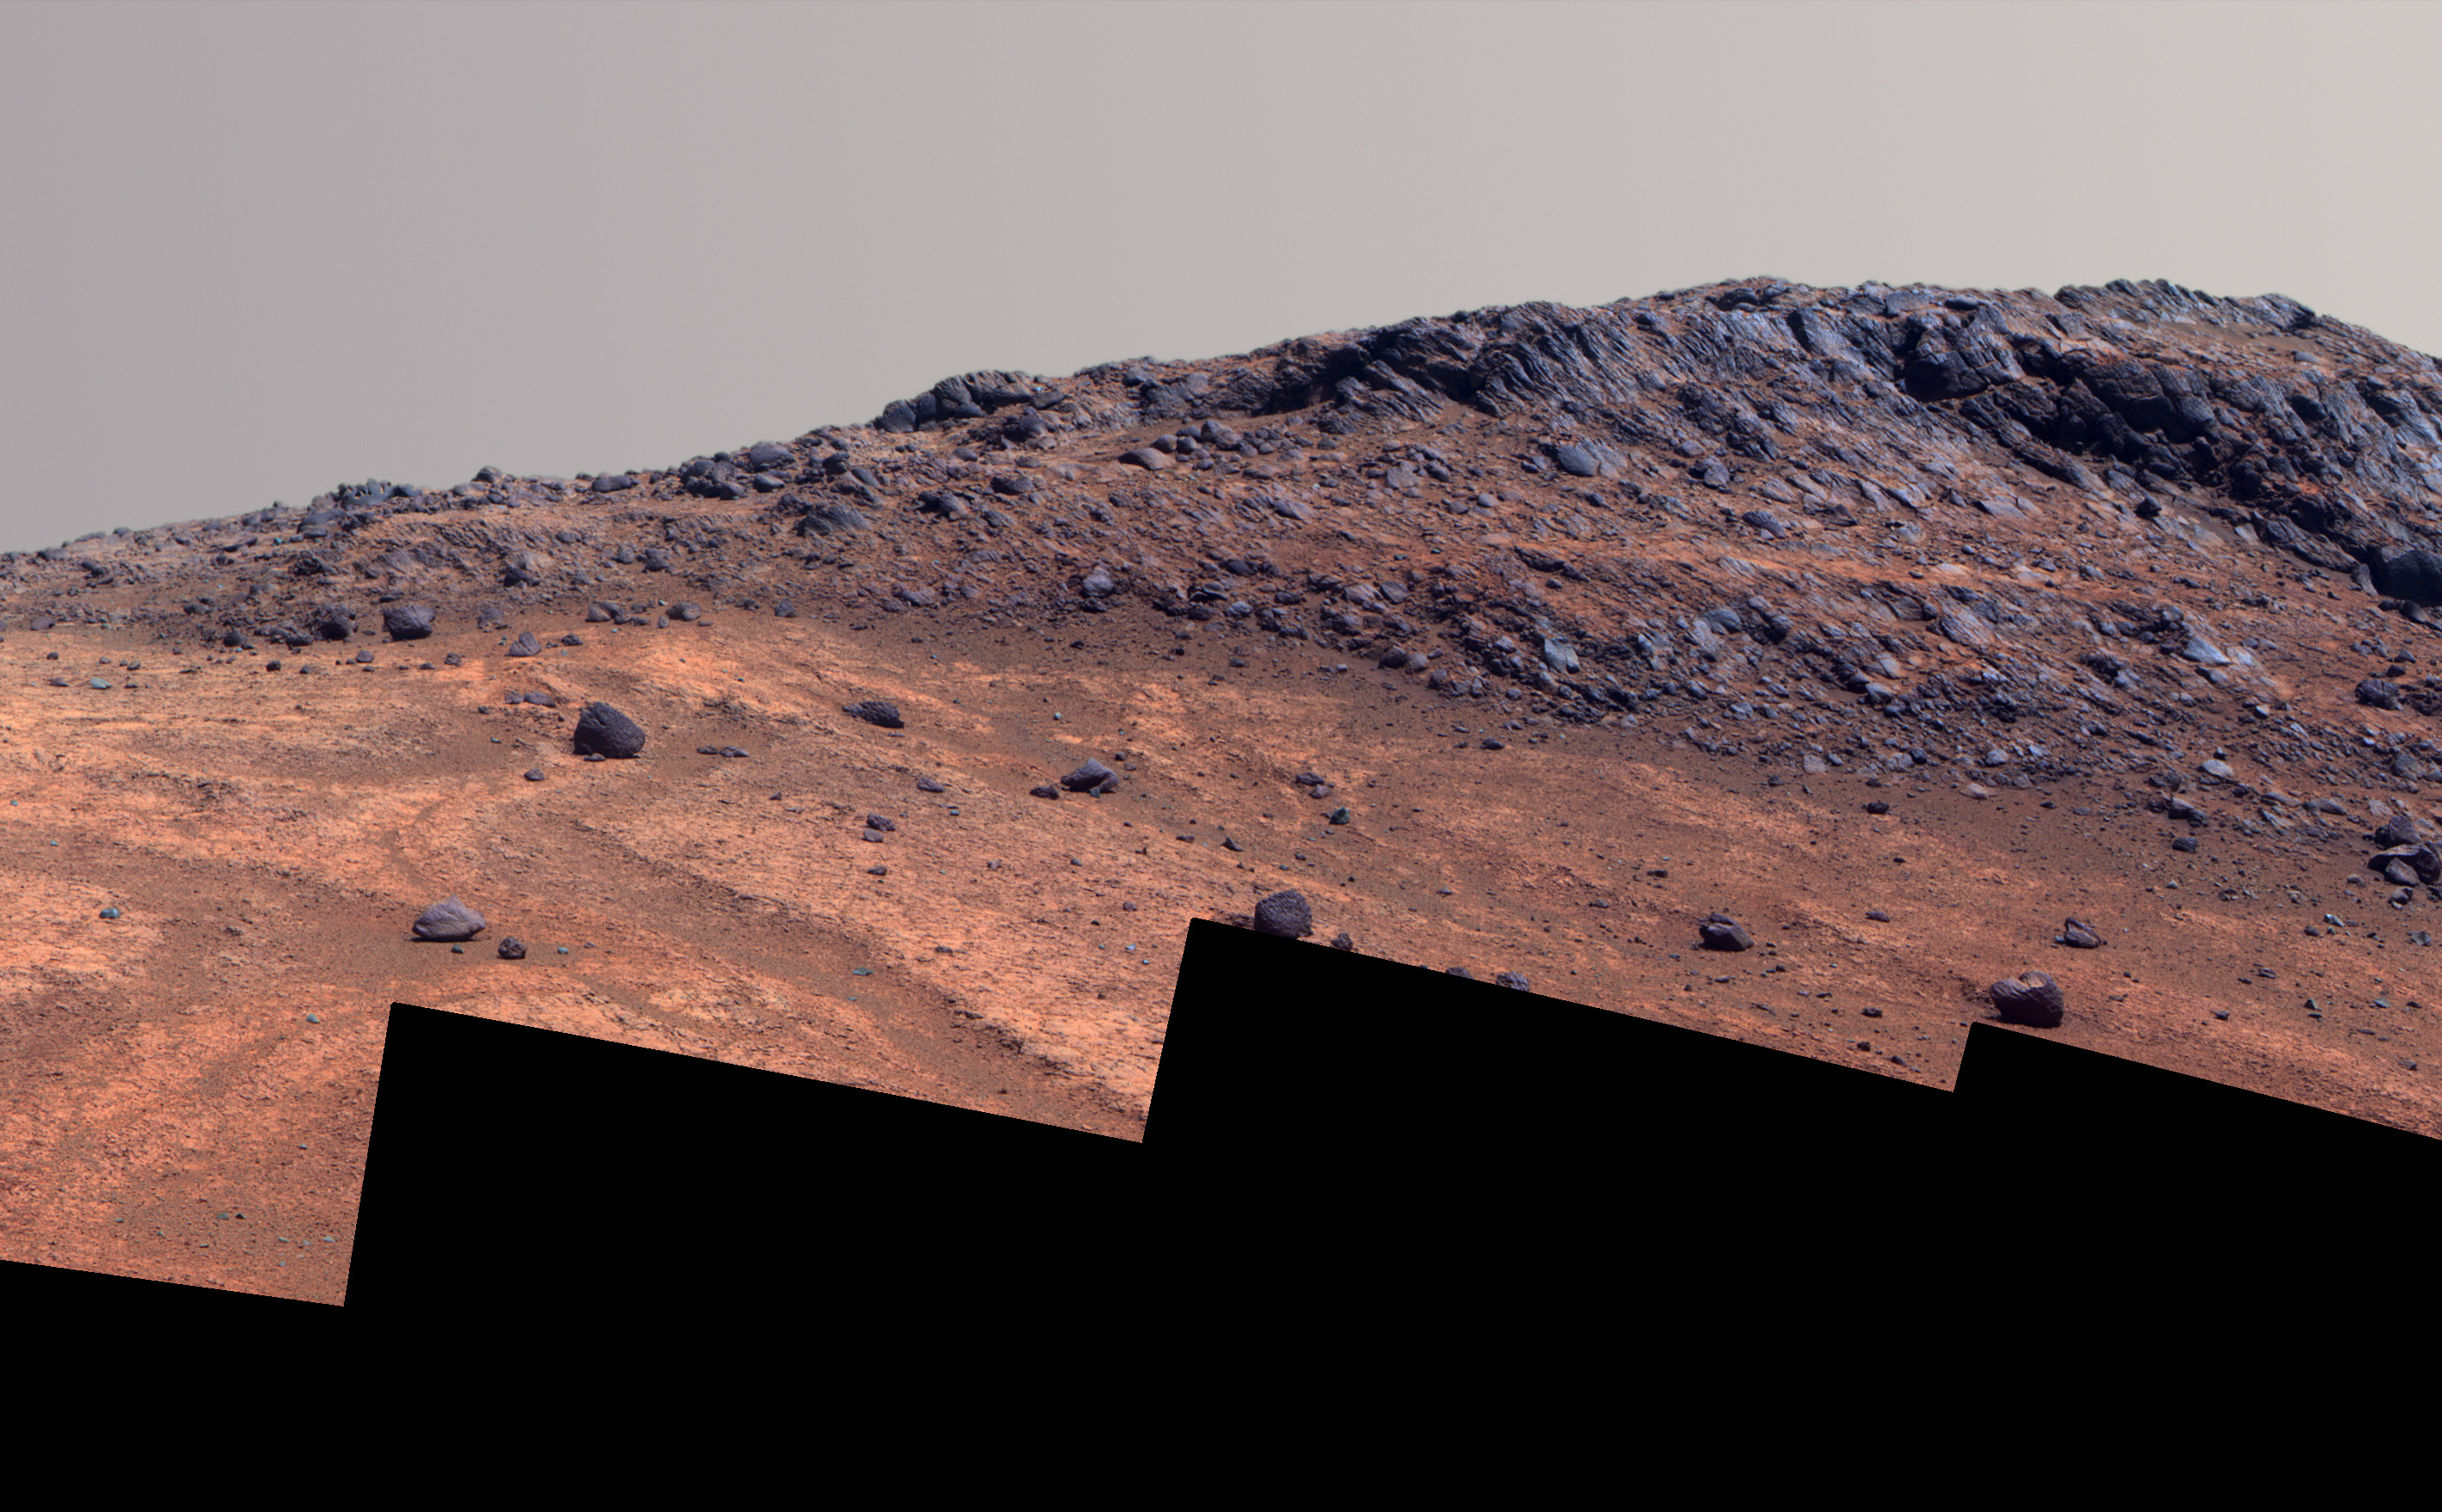 This Martian scene shows contrasting textures and colors of "Hinners Point," at the northern edge of "Marathon Valley," and swirling reddish zones on the valley floor to the left.